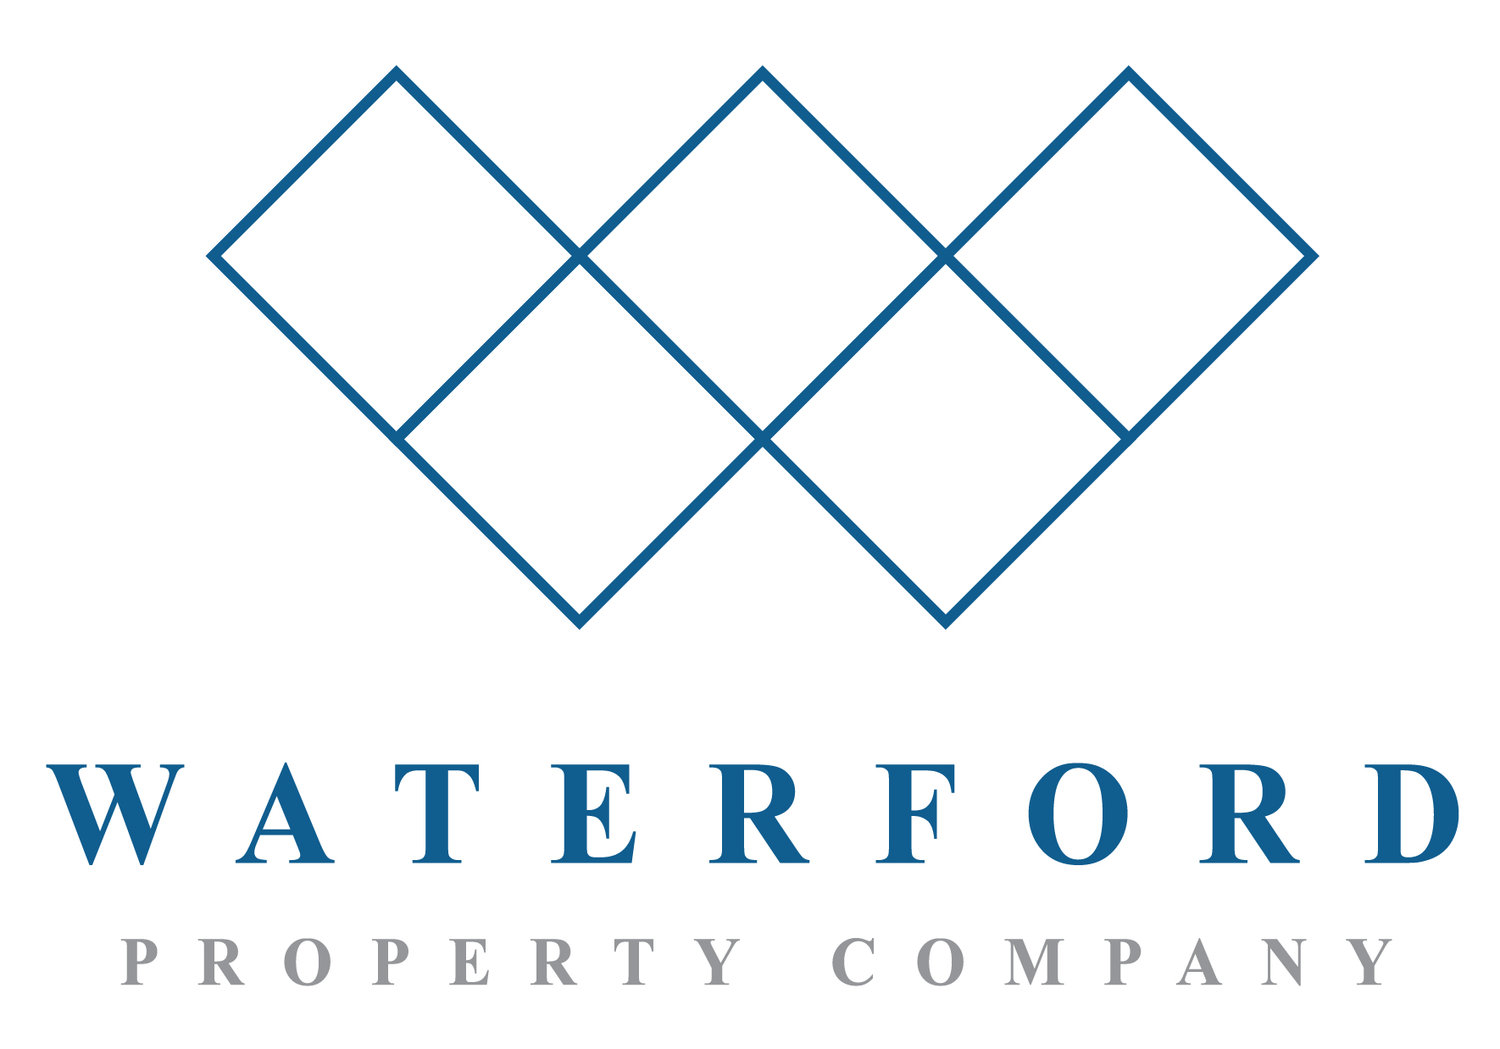 Waterford Property Company